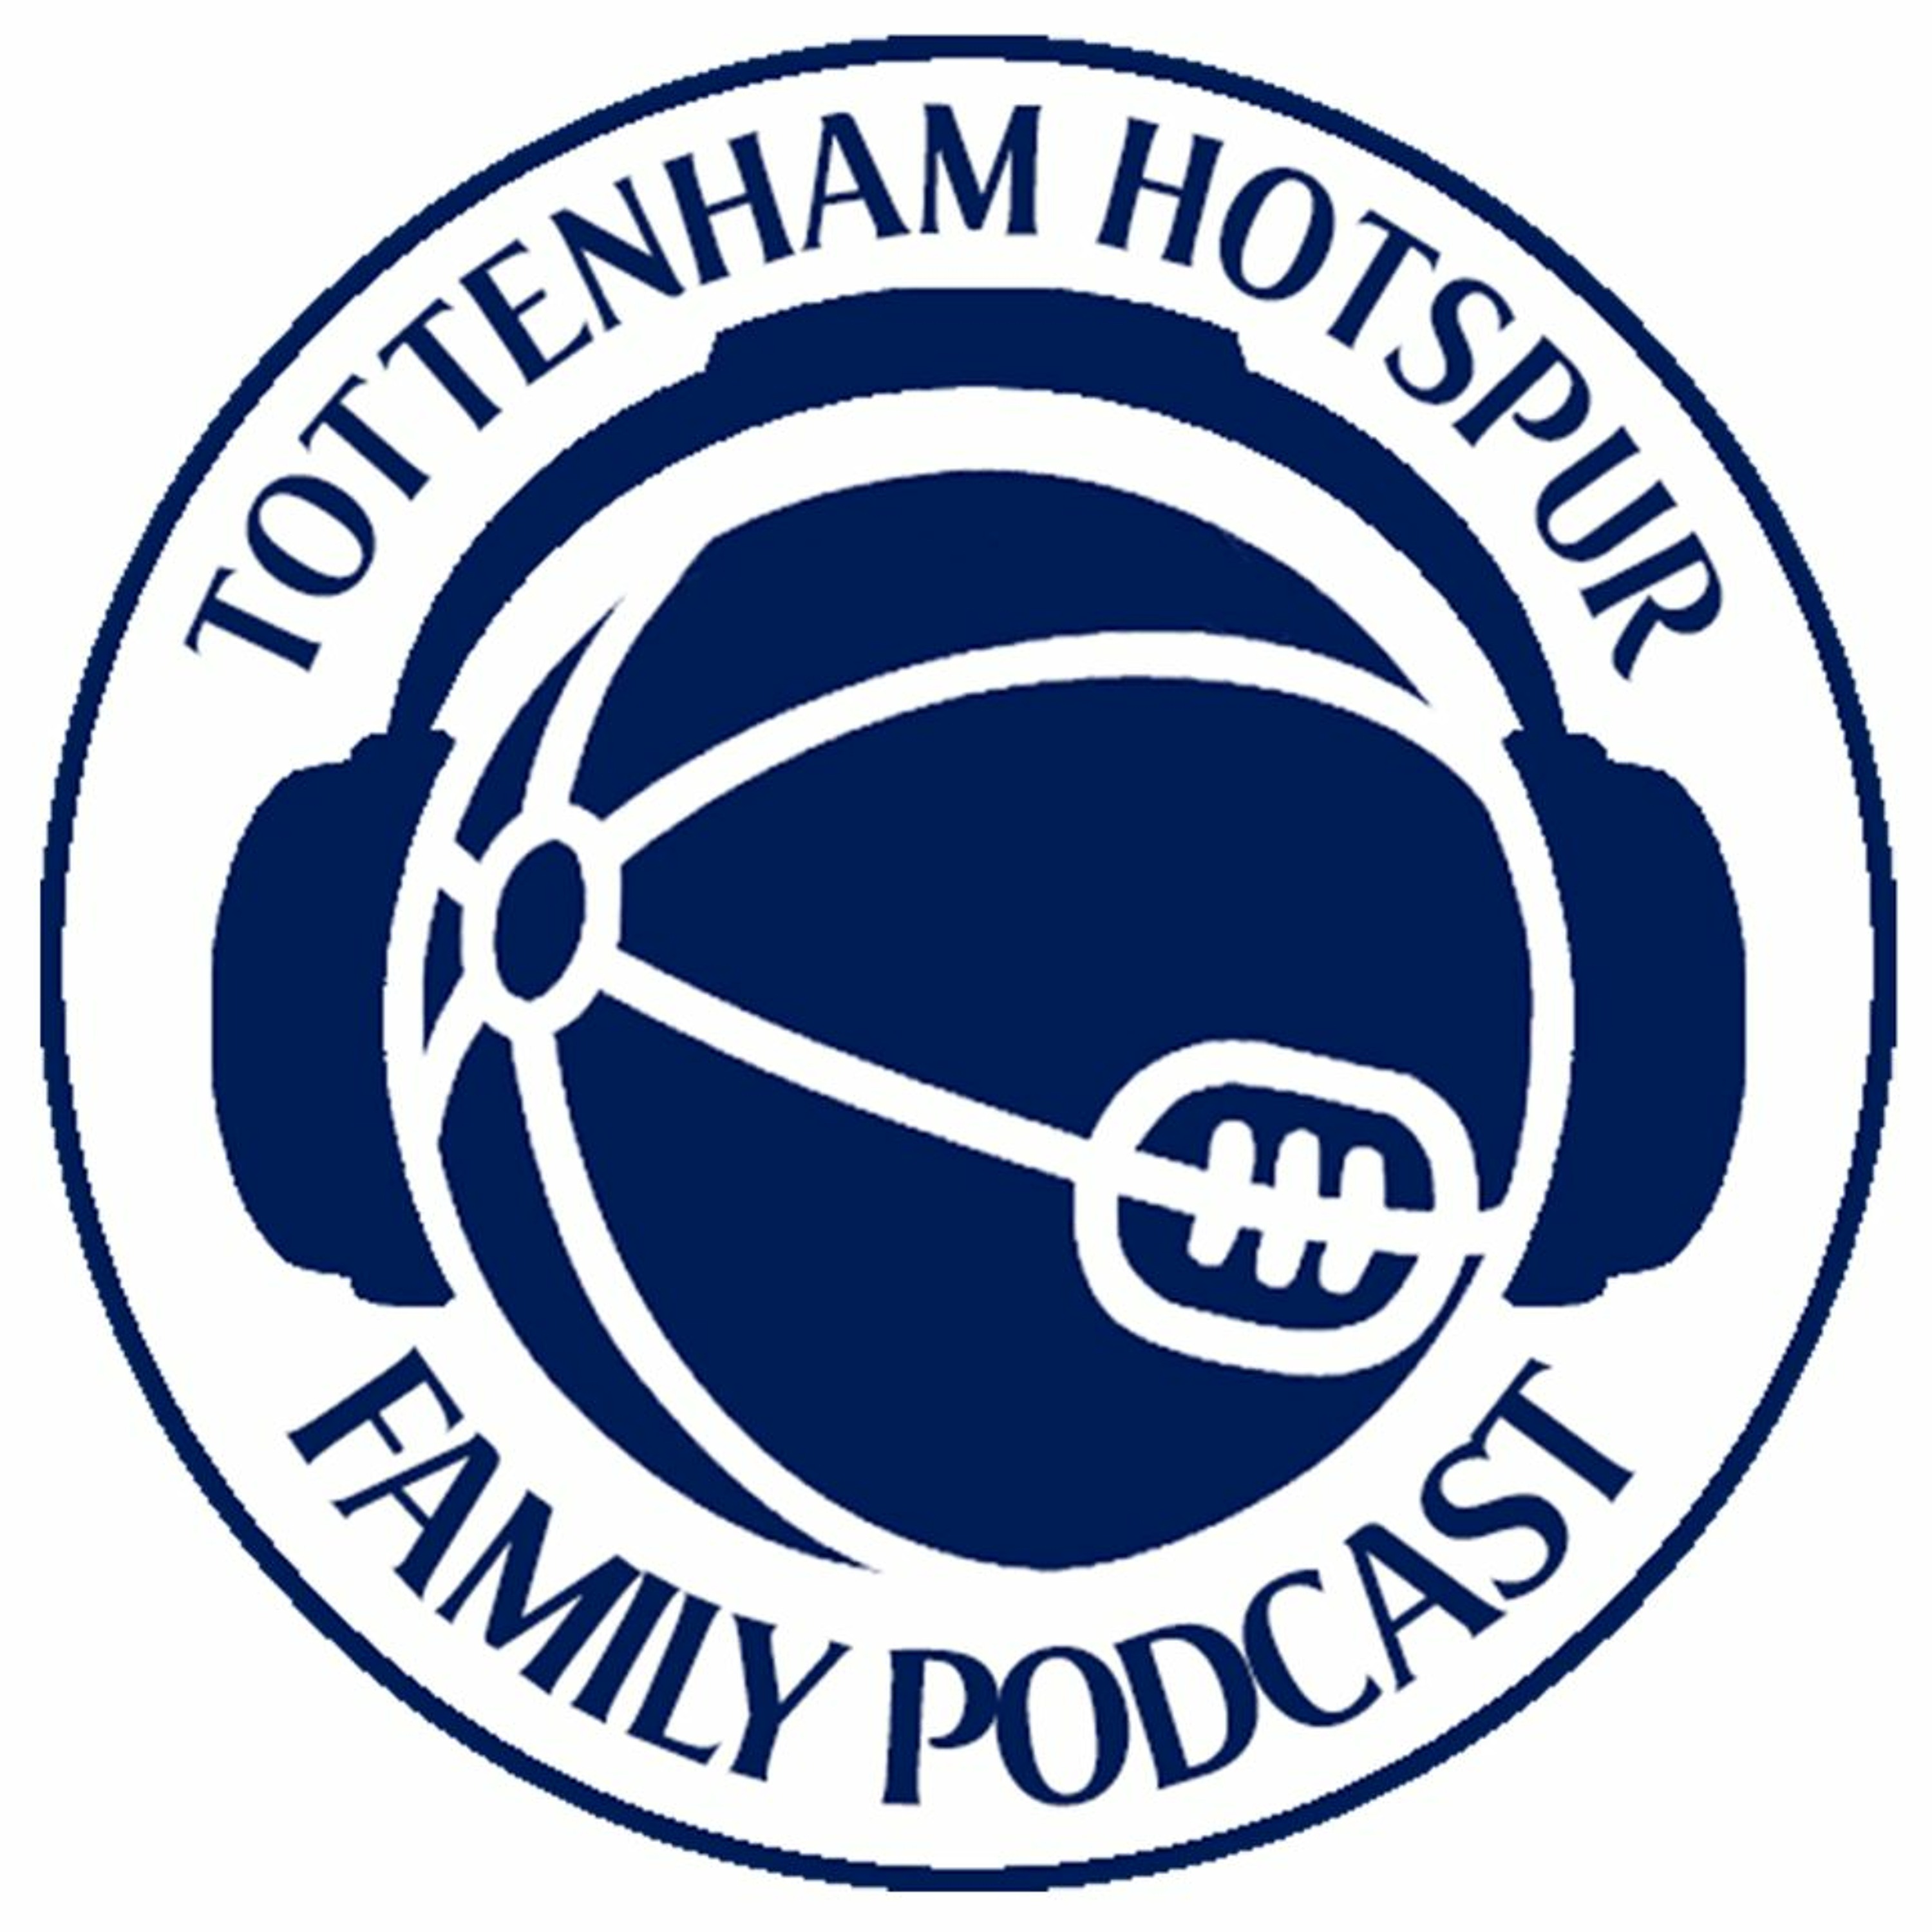 The Tottenham Hotspur Family Podcast - S5EP16 Bring on Barca